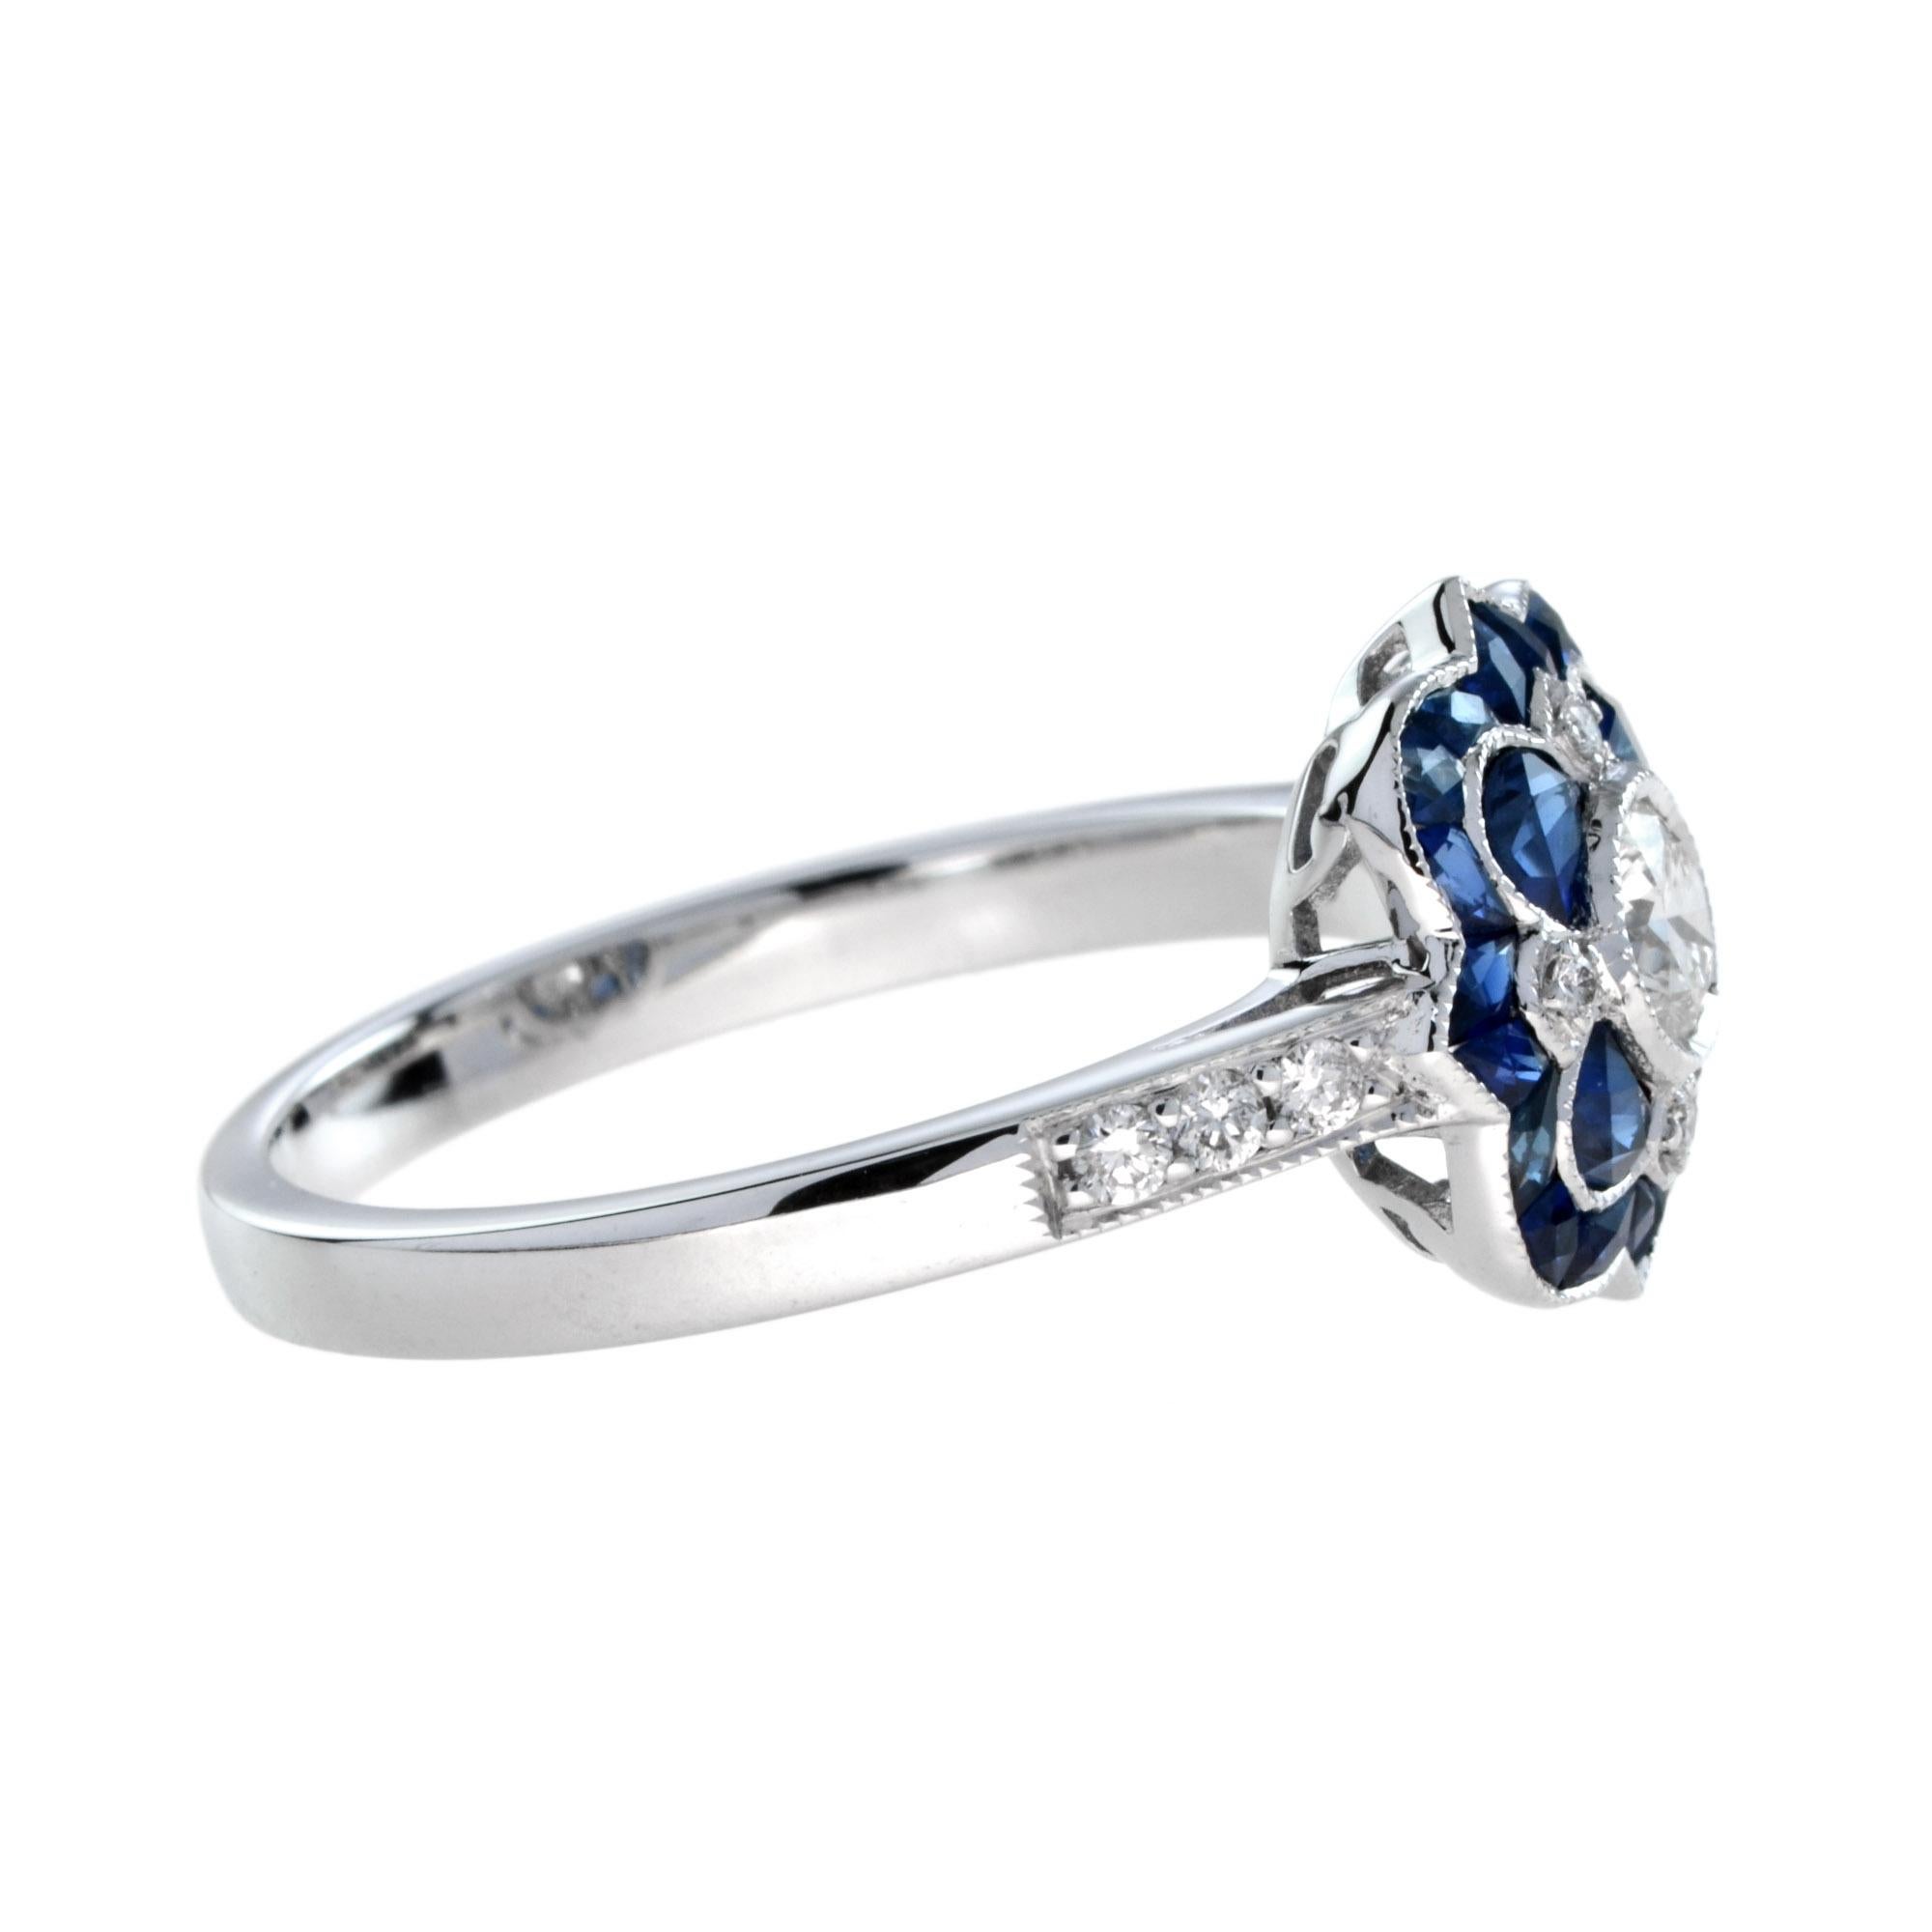 For Sale:  Art Deco Style Diamond and Sapphire Ring in 18K White Gold 6